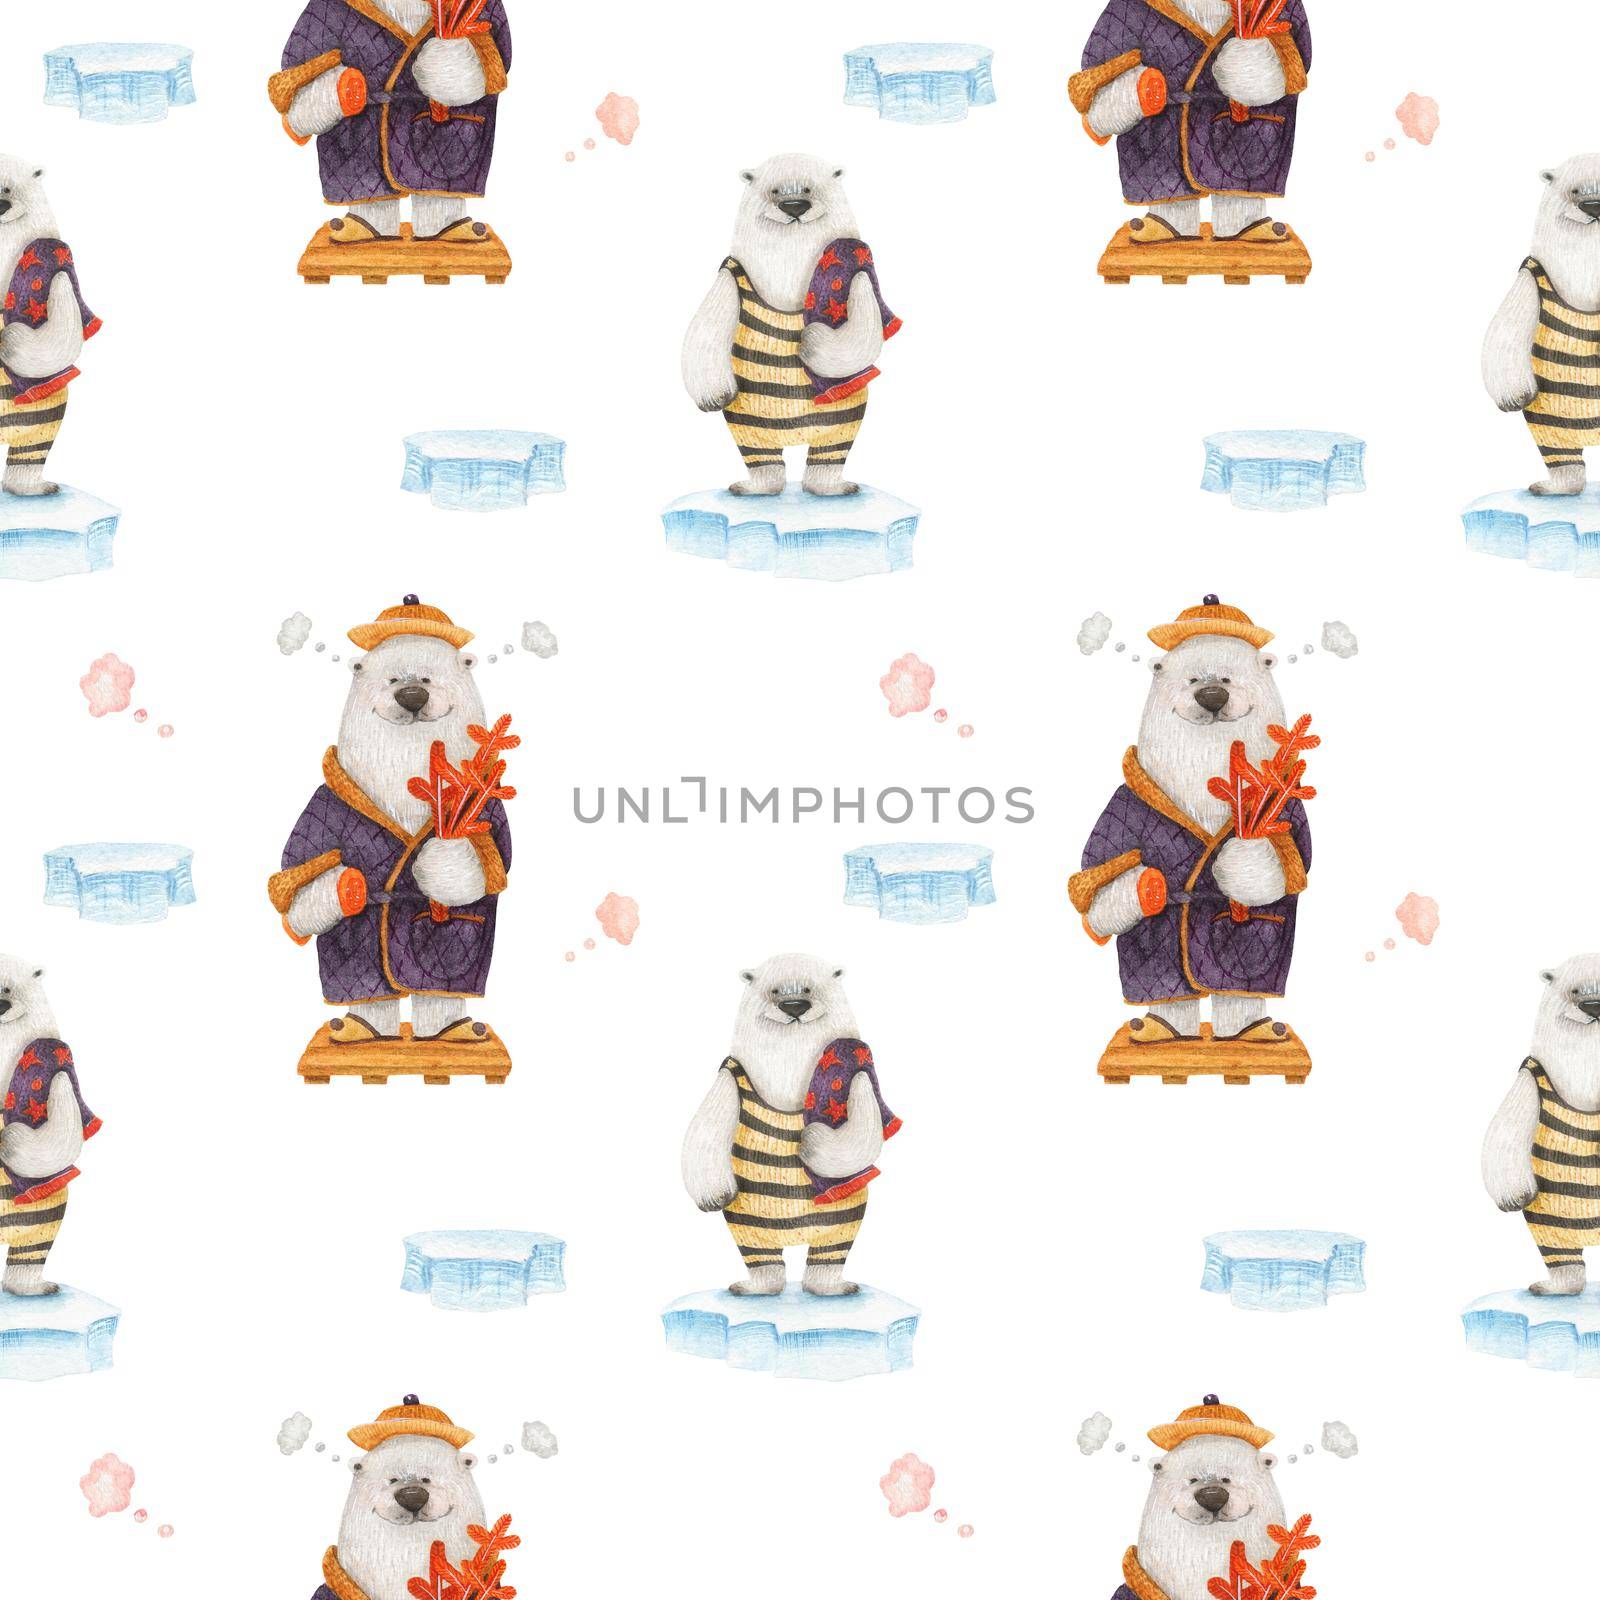 Polar bear healthy lifestyle. Bears in sauna. Watercolor seamless patterns for textile, wrapping paper and any tiled design. White background, clipping path uncluded